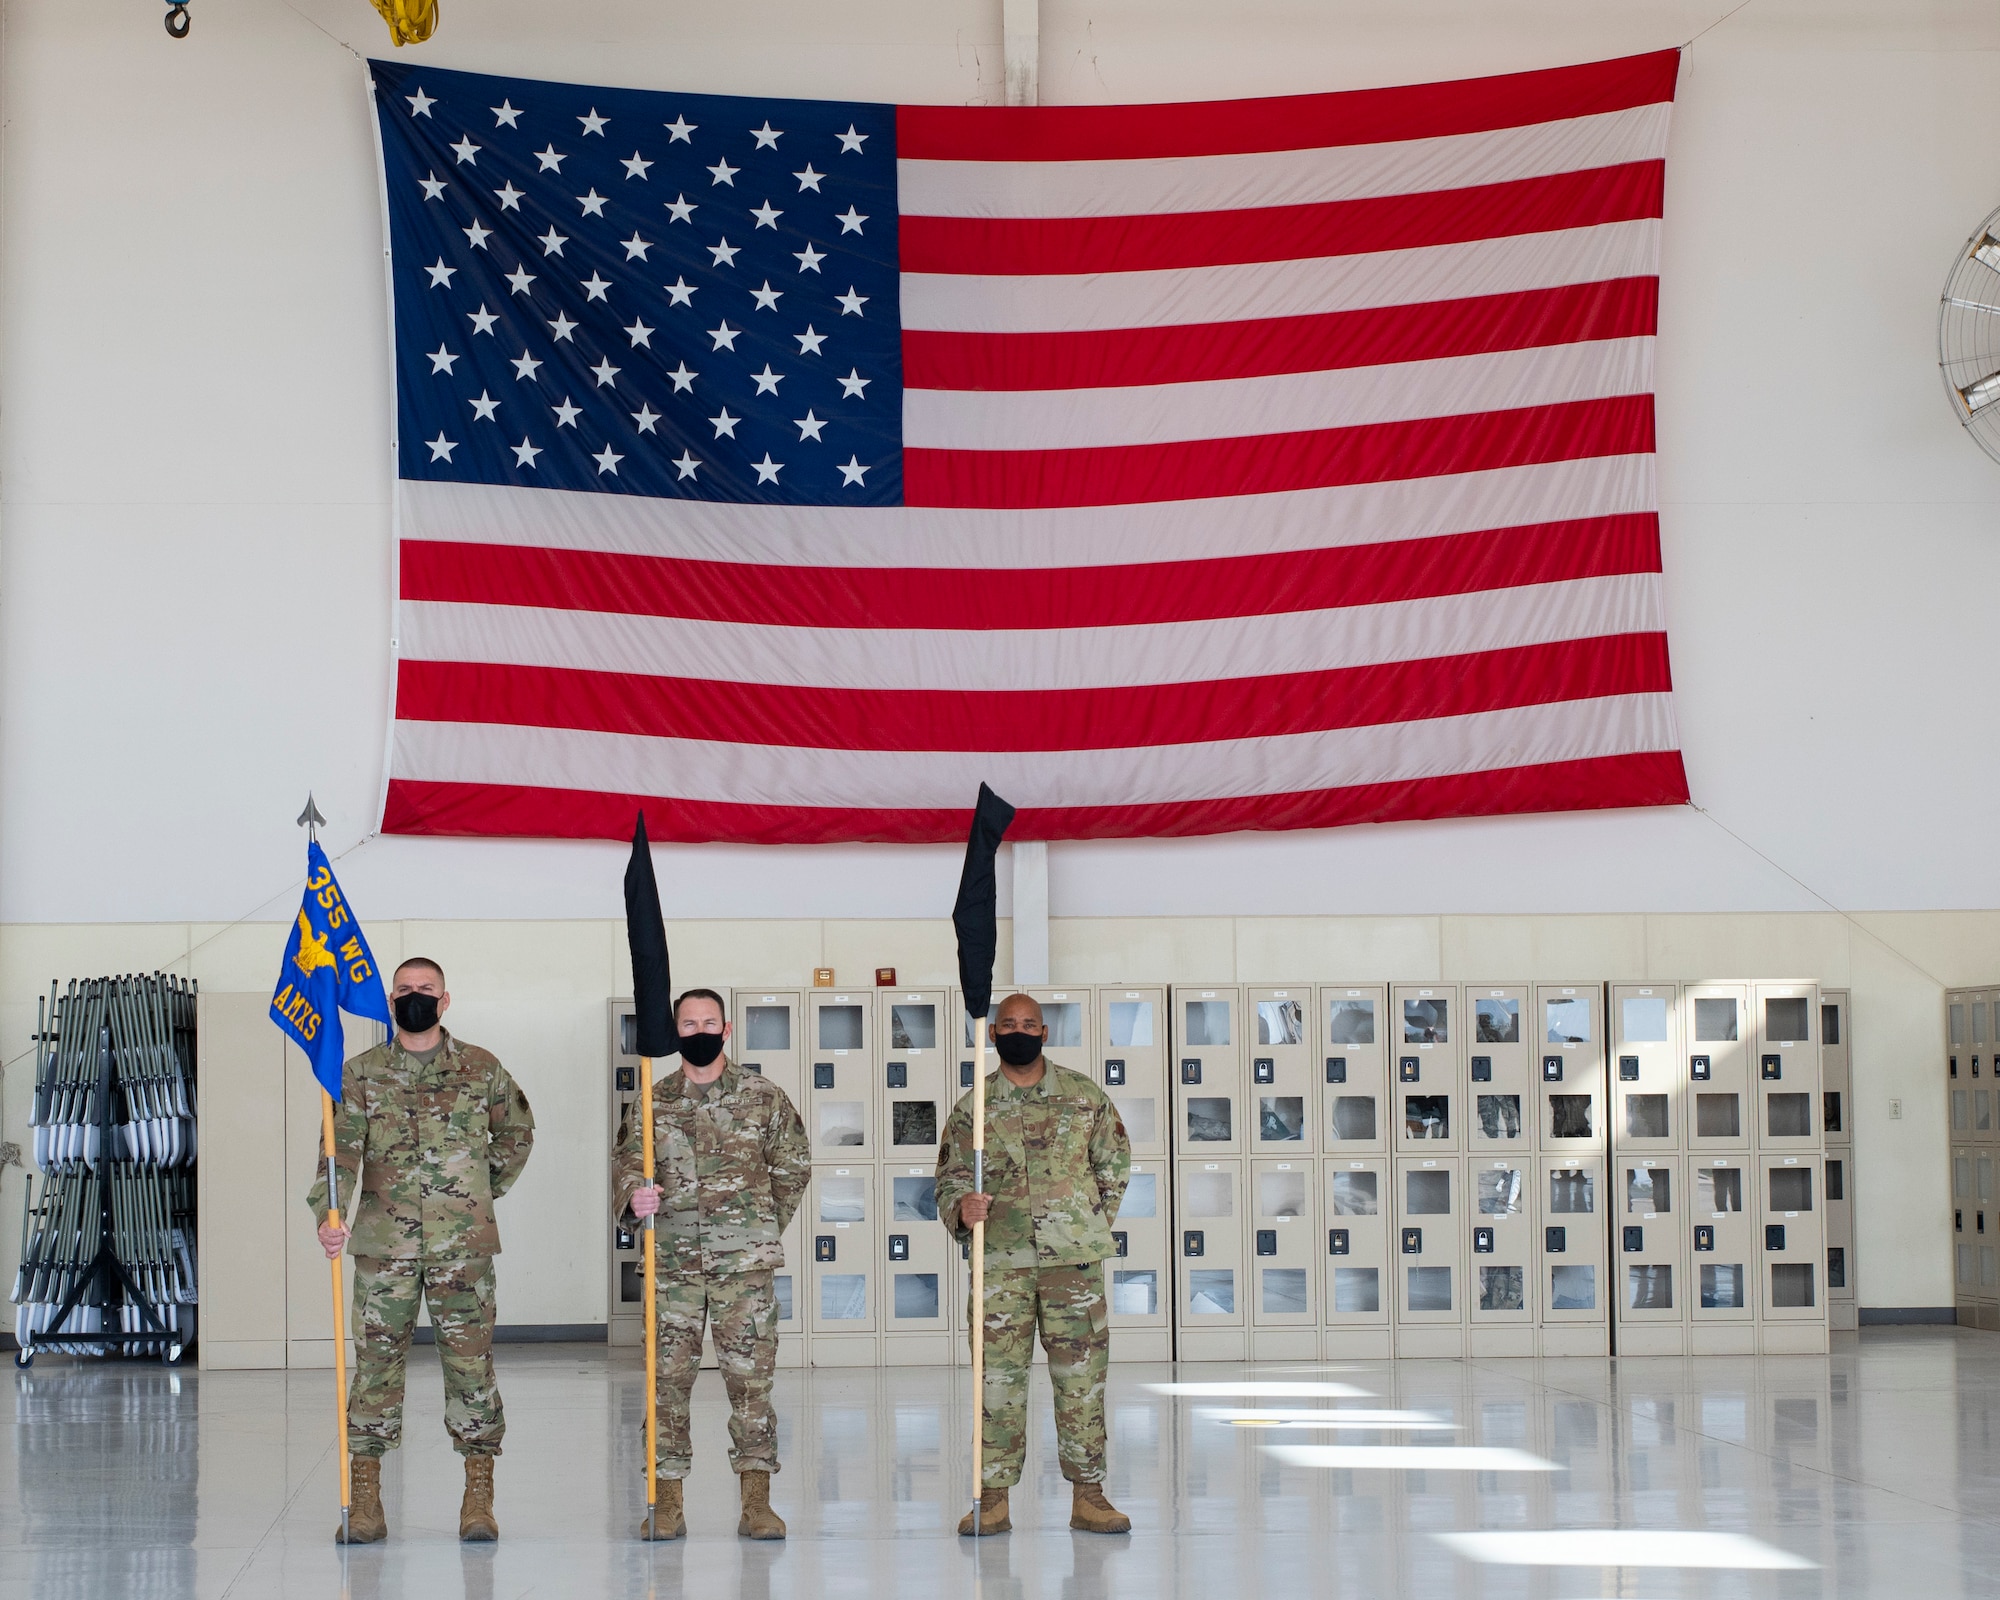 three men stand in front of a American flag.